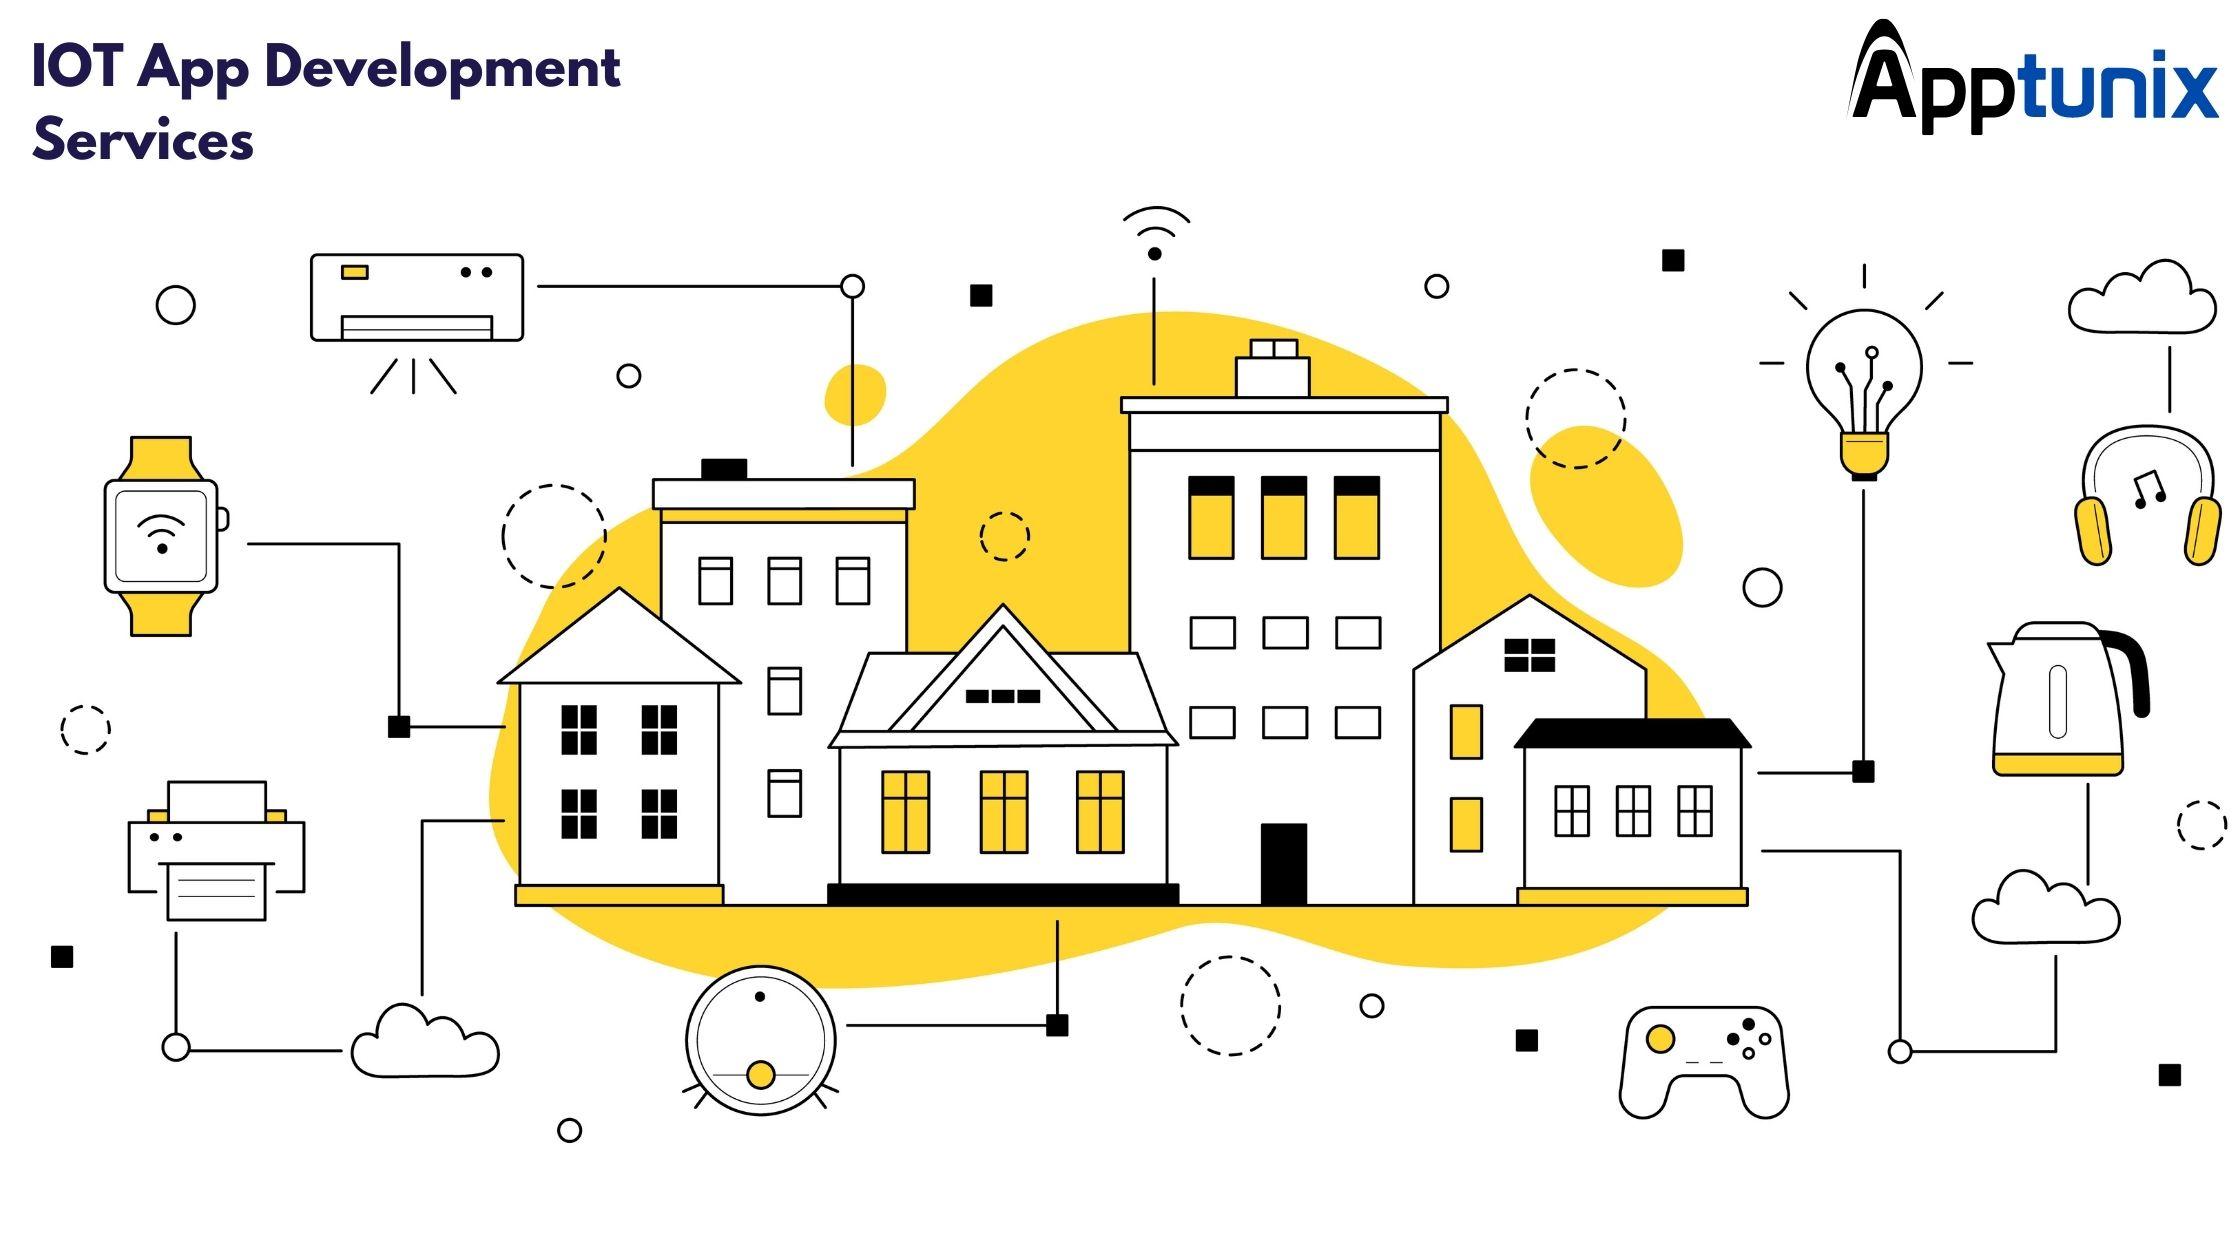 Leveraging IoT App Development Services for Smarter, Connected Businesses